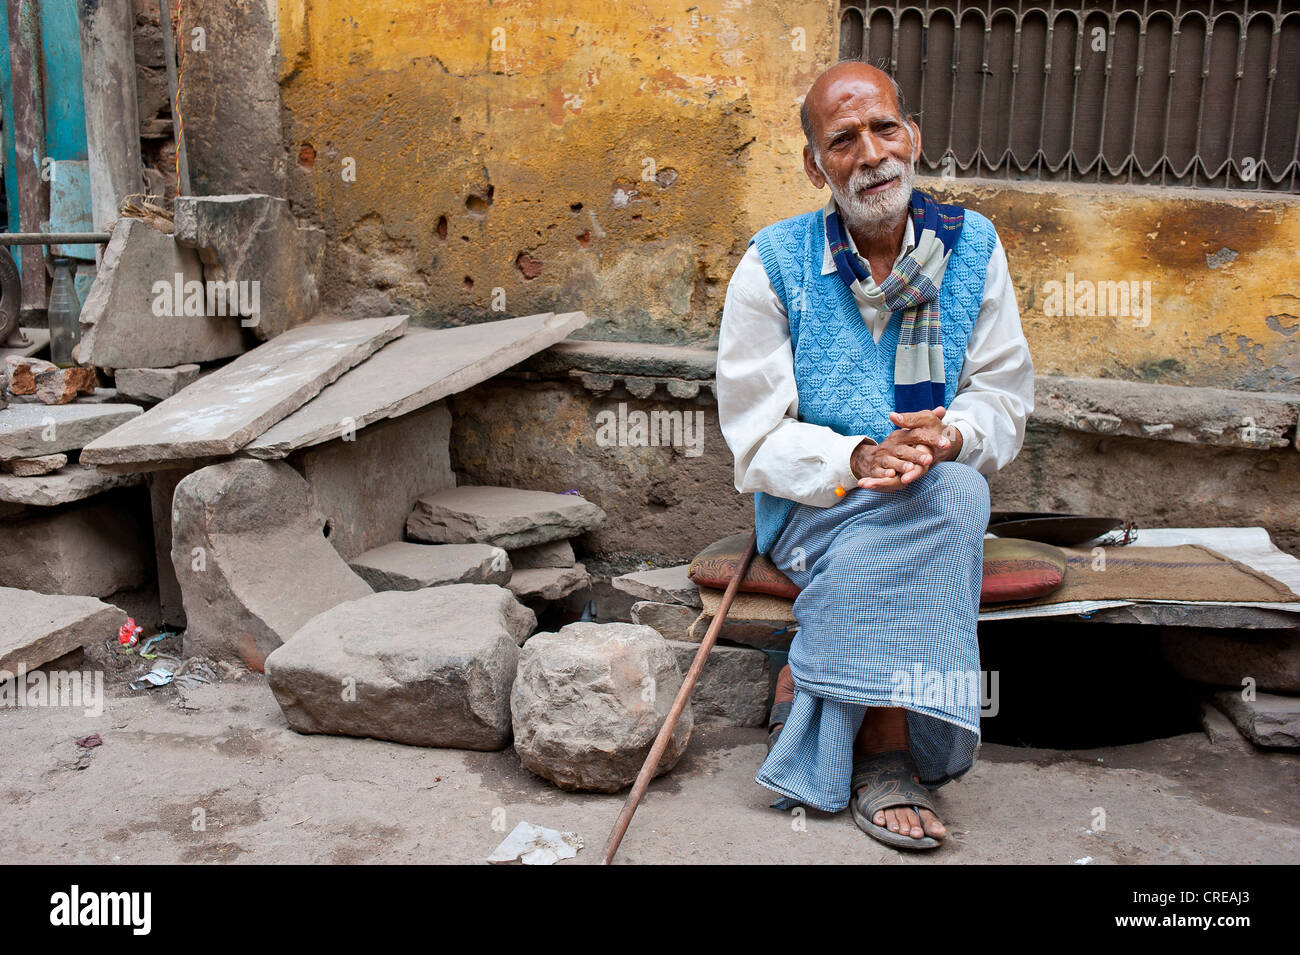 Elderly Indian man, Rajasthani, sitting on a stone bench with cushions in front of a house, resting, Bundi, Rajasthan, India Stock Photo